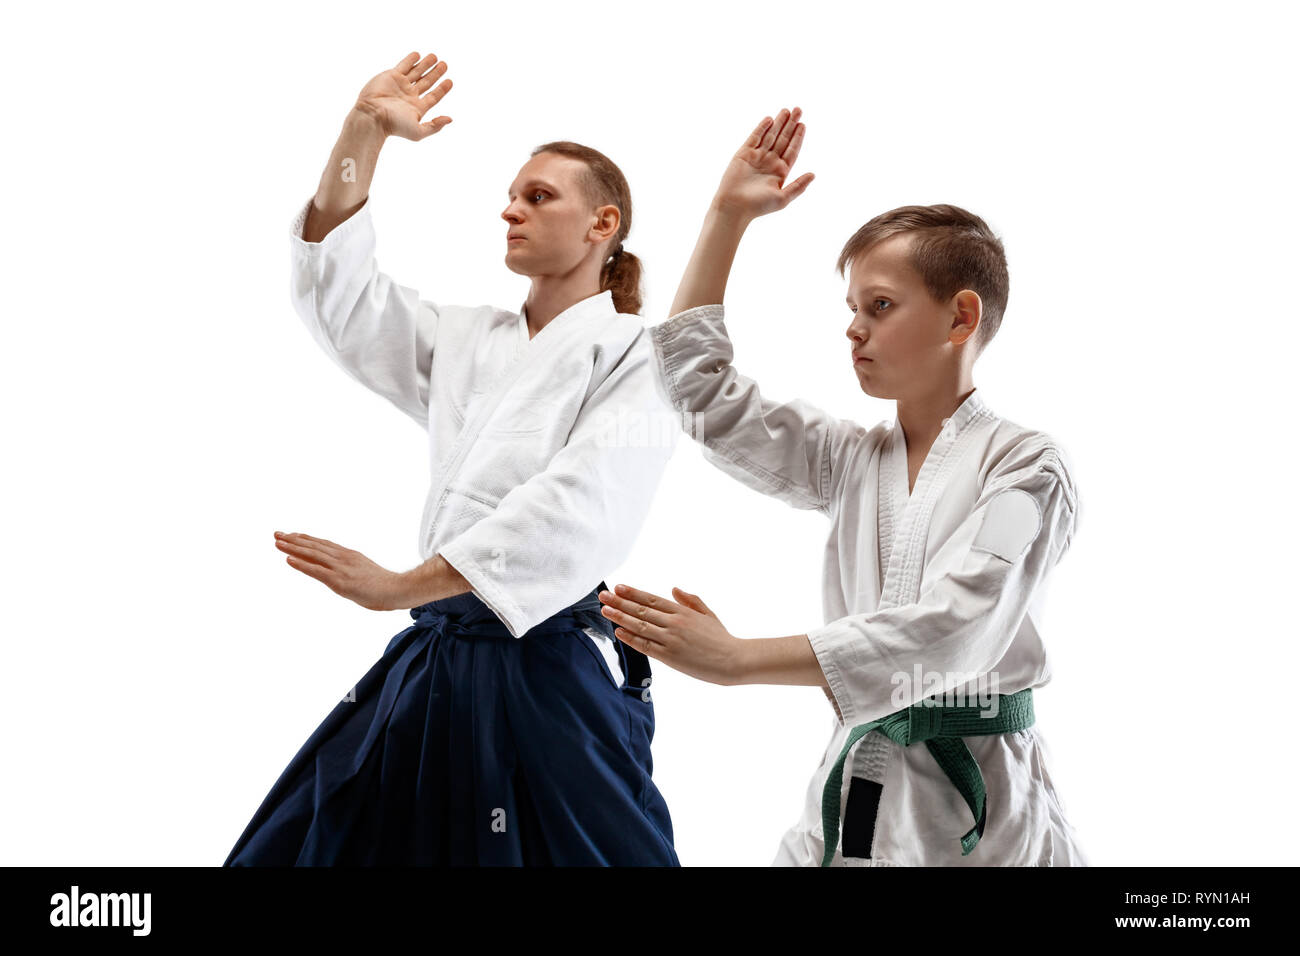 Man and woman fighting at Aikido training in martial arts school. Healthy lifestyle and sports concept. Man with beard in white kimono on white background. Karate woman with a concentrated face. Stock Photo